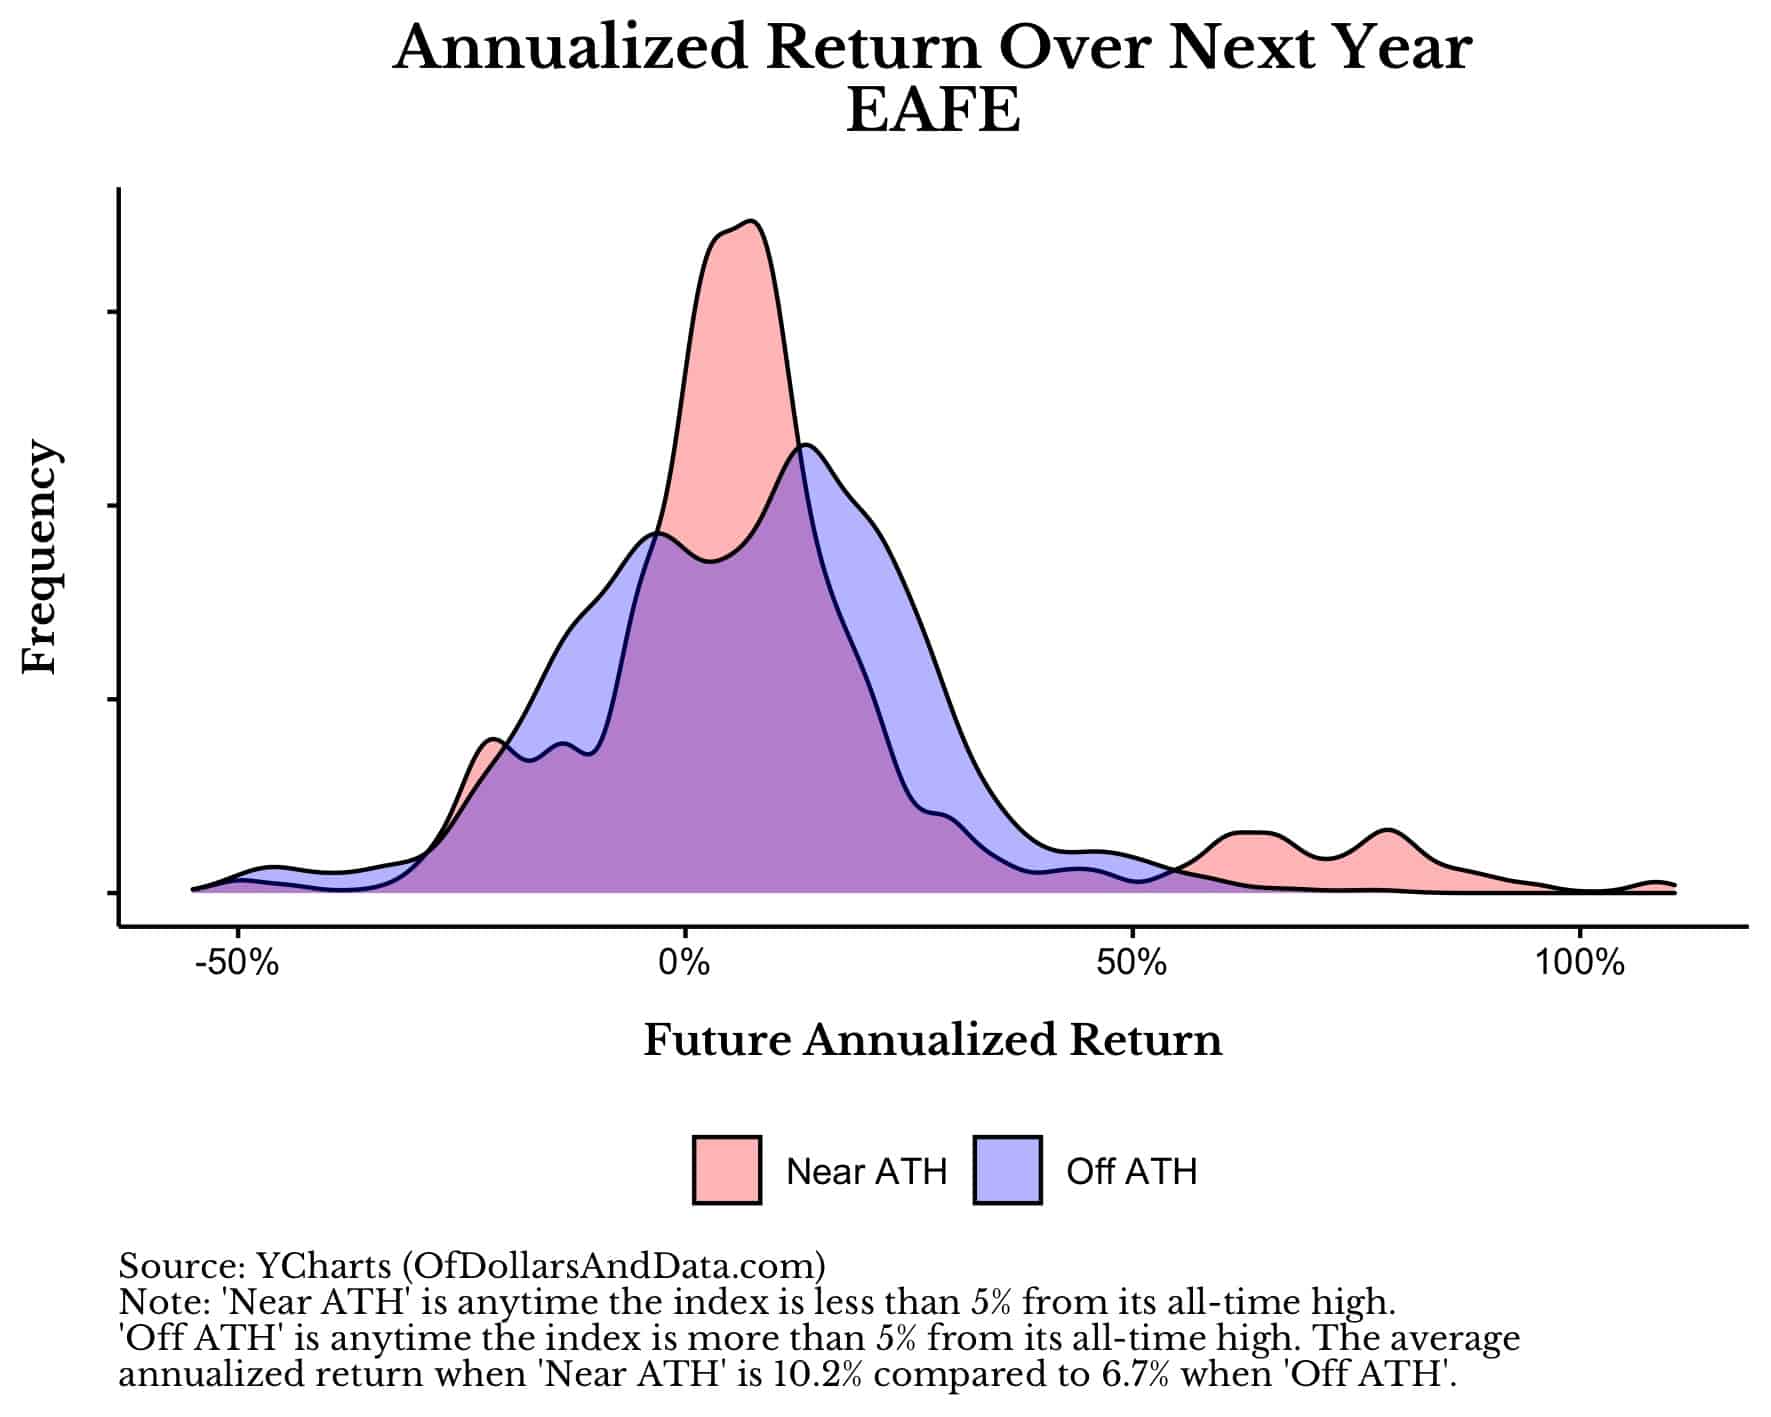 Annualized return distributions for the EAFE over the next year near and off all-time highs